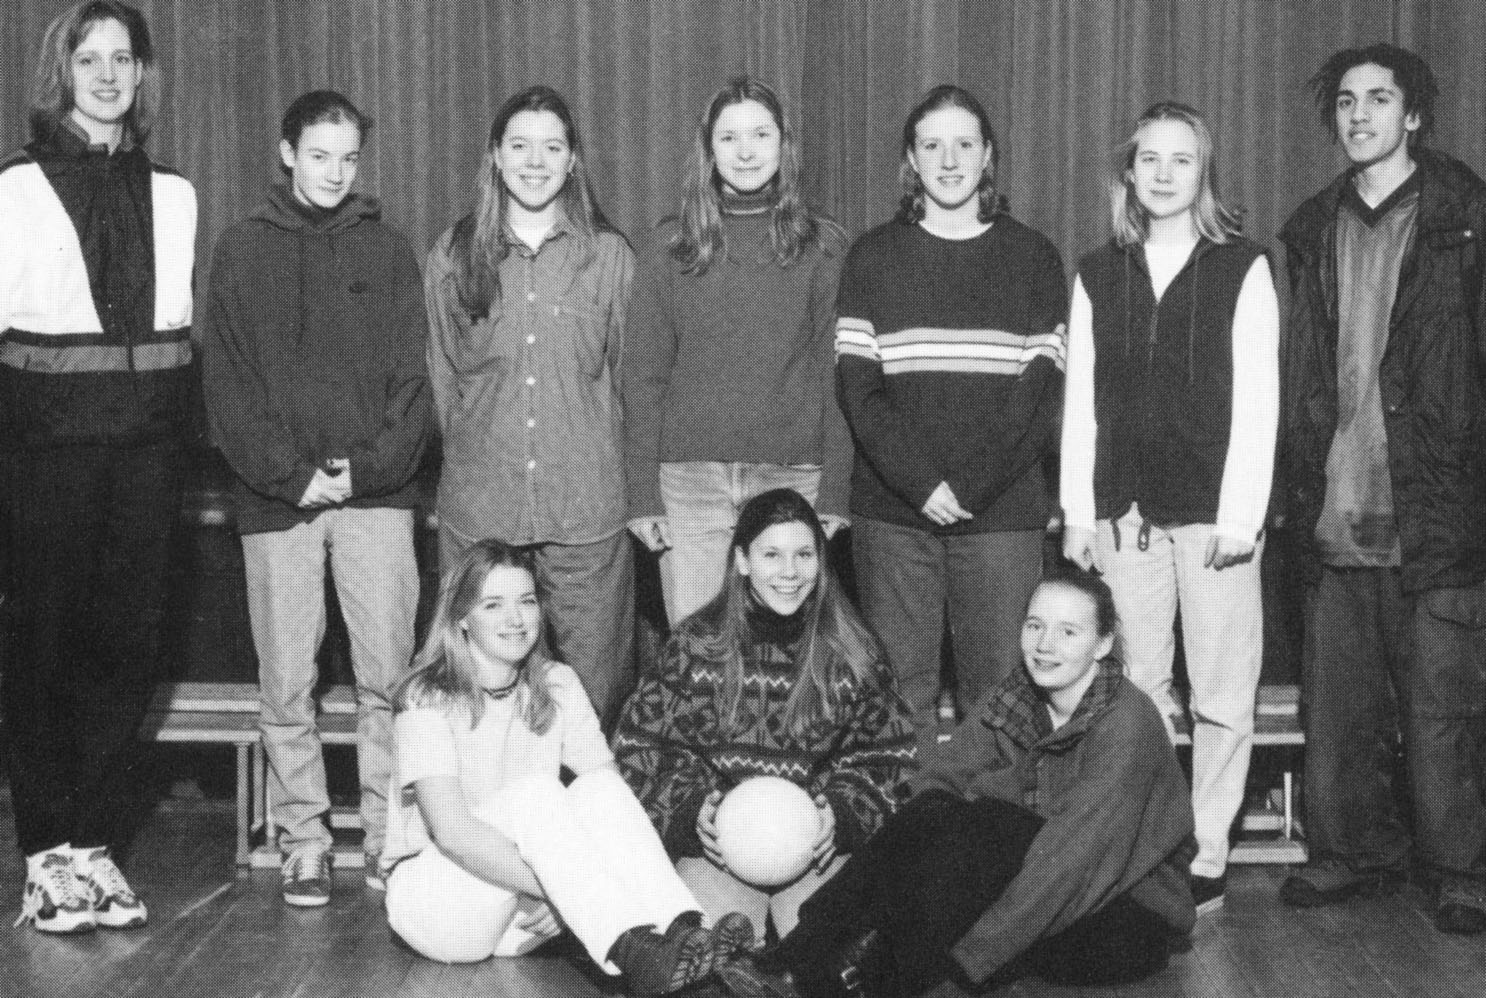 (Click to magnify) FRONT ROW: Deanna Beggs, Julia Peters, Katie Ballinger; BACK ROW: Ms. Dobson, Linda Hamilton, Erin Blackstock, Jaquie Millage, Chrissy Henderson, Rita Emsley, Ryan DelSol; ABSENT: Sarah Connell, Kealy Morgan.